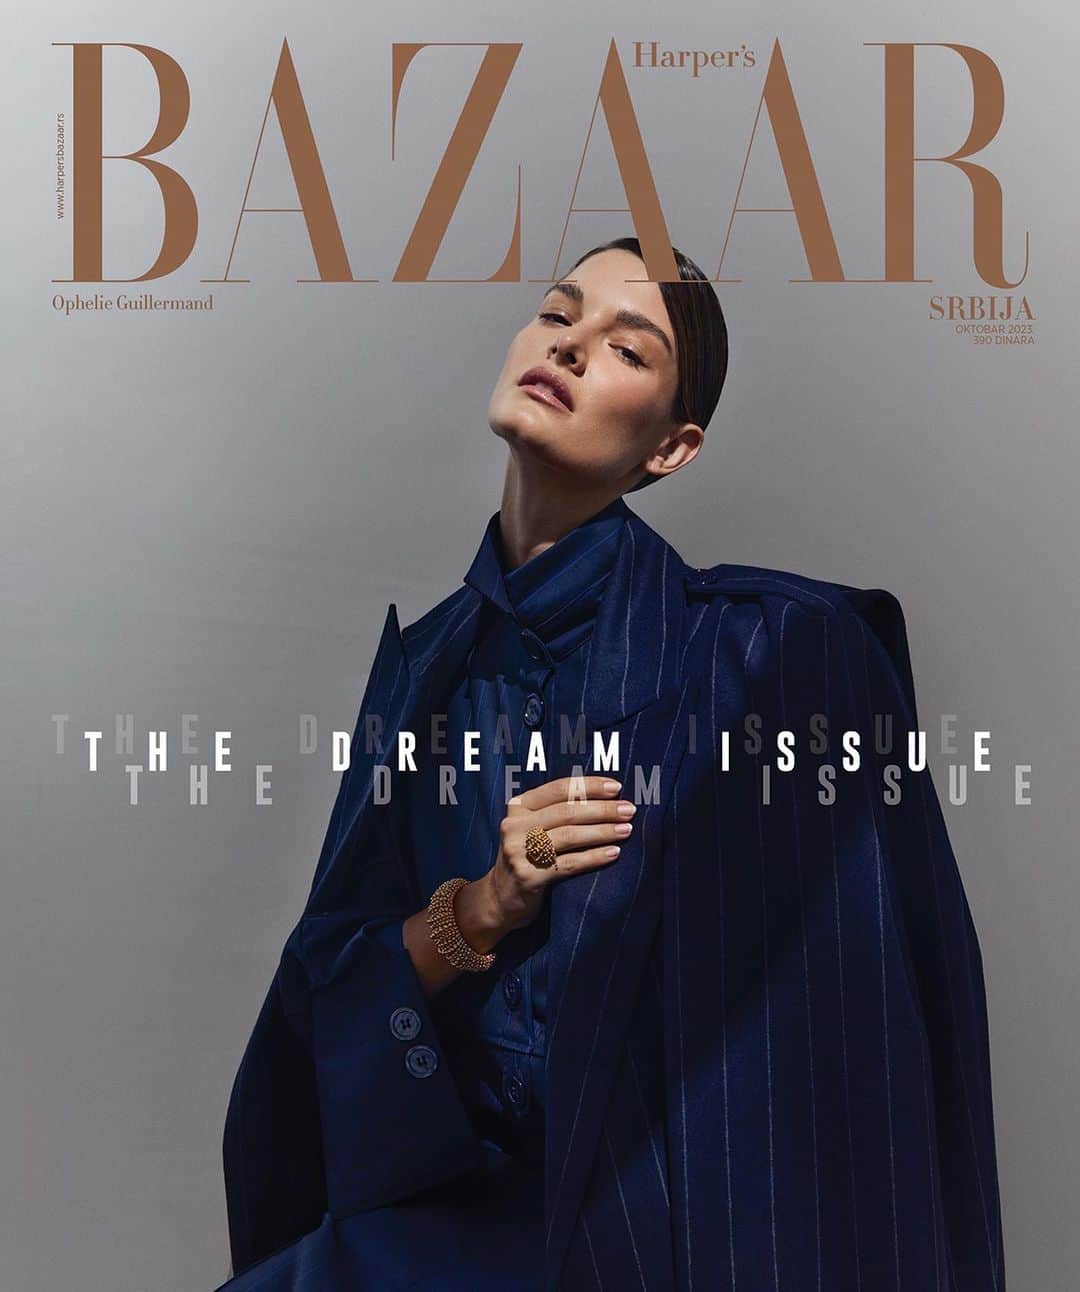 OPHELIEのインスタグラム：「Little Ophélie wouldn’t believe seeing her name on a Harper’s Bazaar cover 🖤 believe in your dreams  Thank you @harpersbazaarserbia  Photographer : @studiofreddypersson  Stylist @marko.mrkaja  Cover 1 : @batakovicbelgrade @loropiana fabric & @cartier  Cover 2 : @dior  Hair : @fabbhairdresser  Make up : @marykendallll」